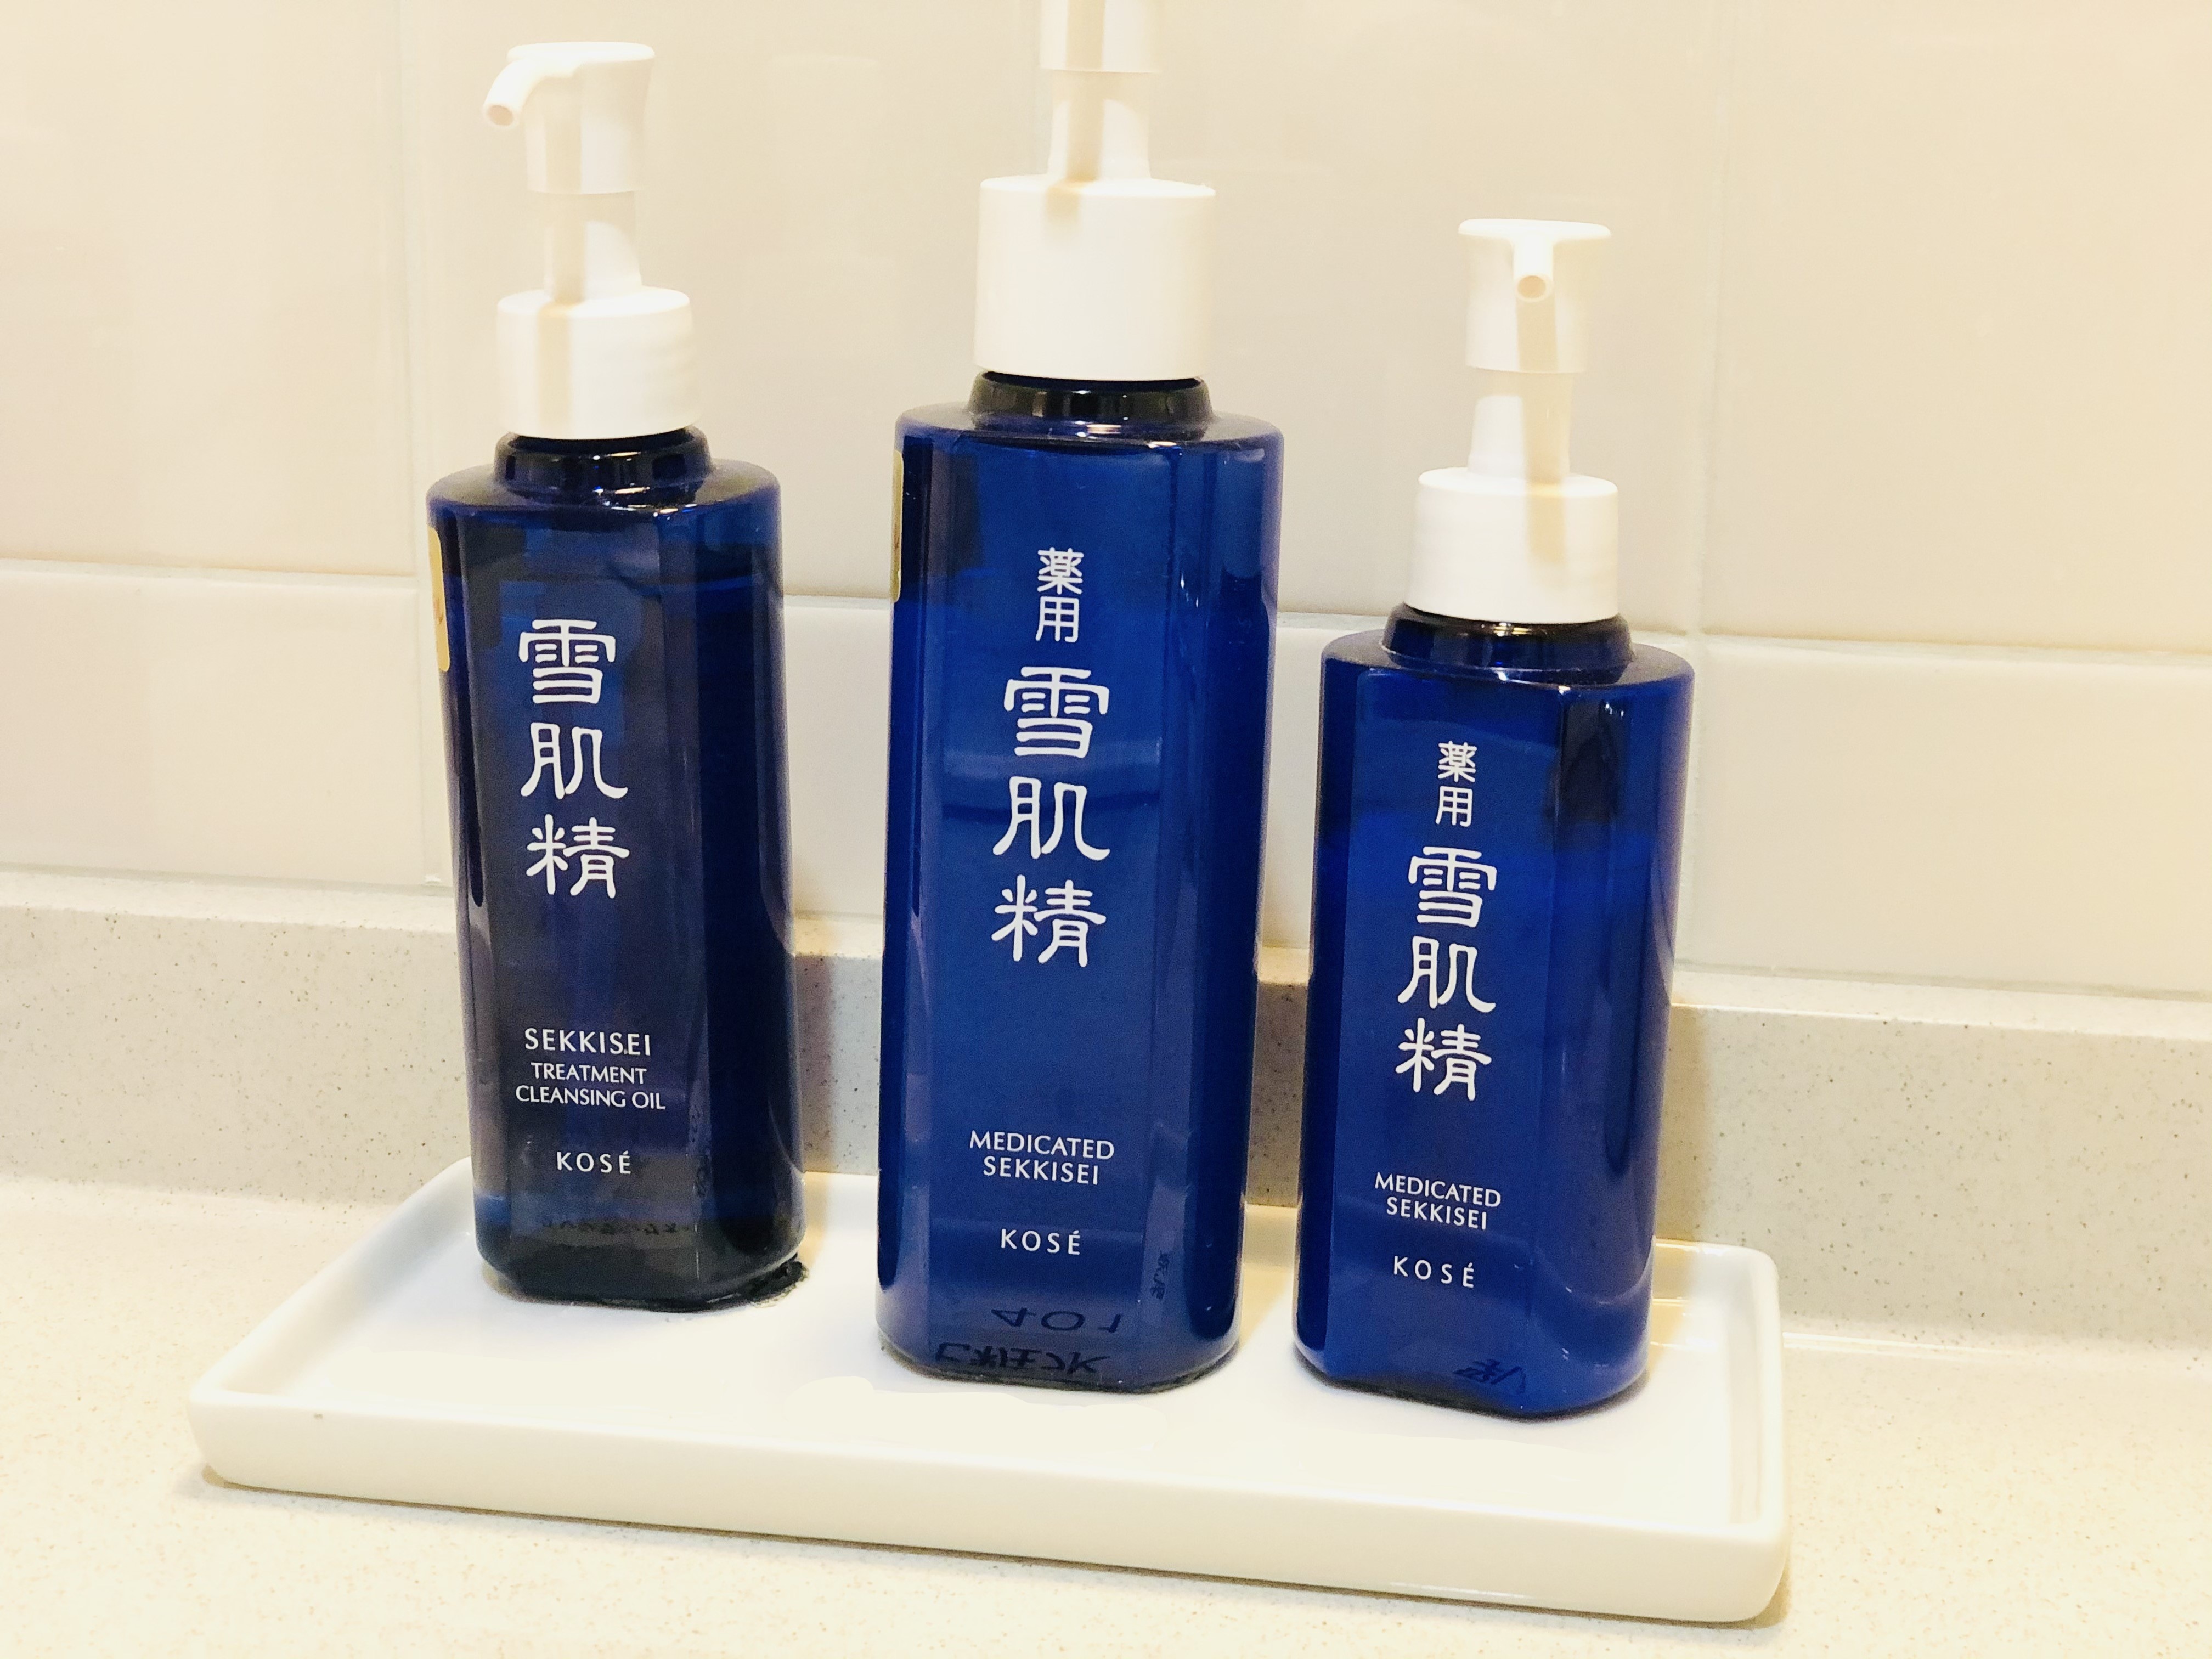 《West Wing》 West Wing limited amenities "Sekkisei"